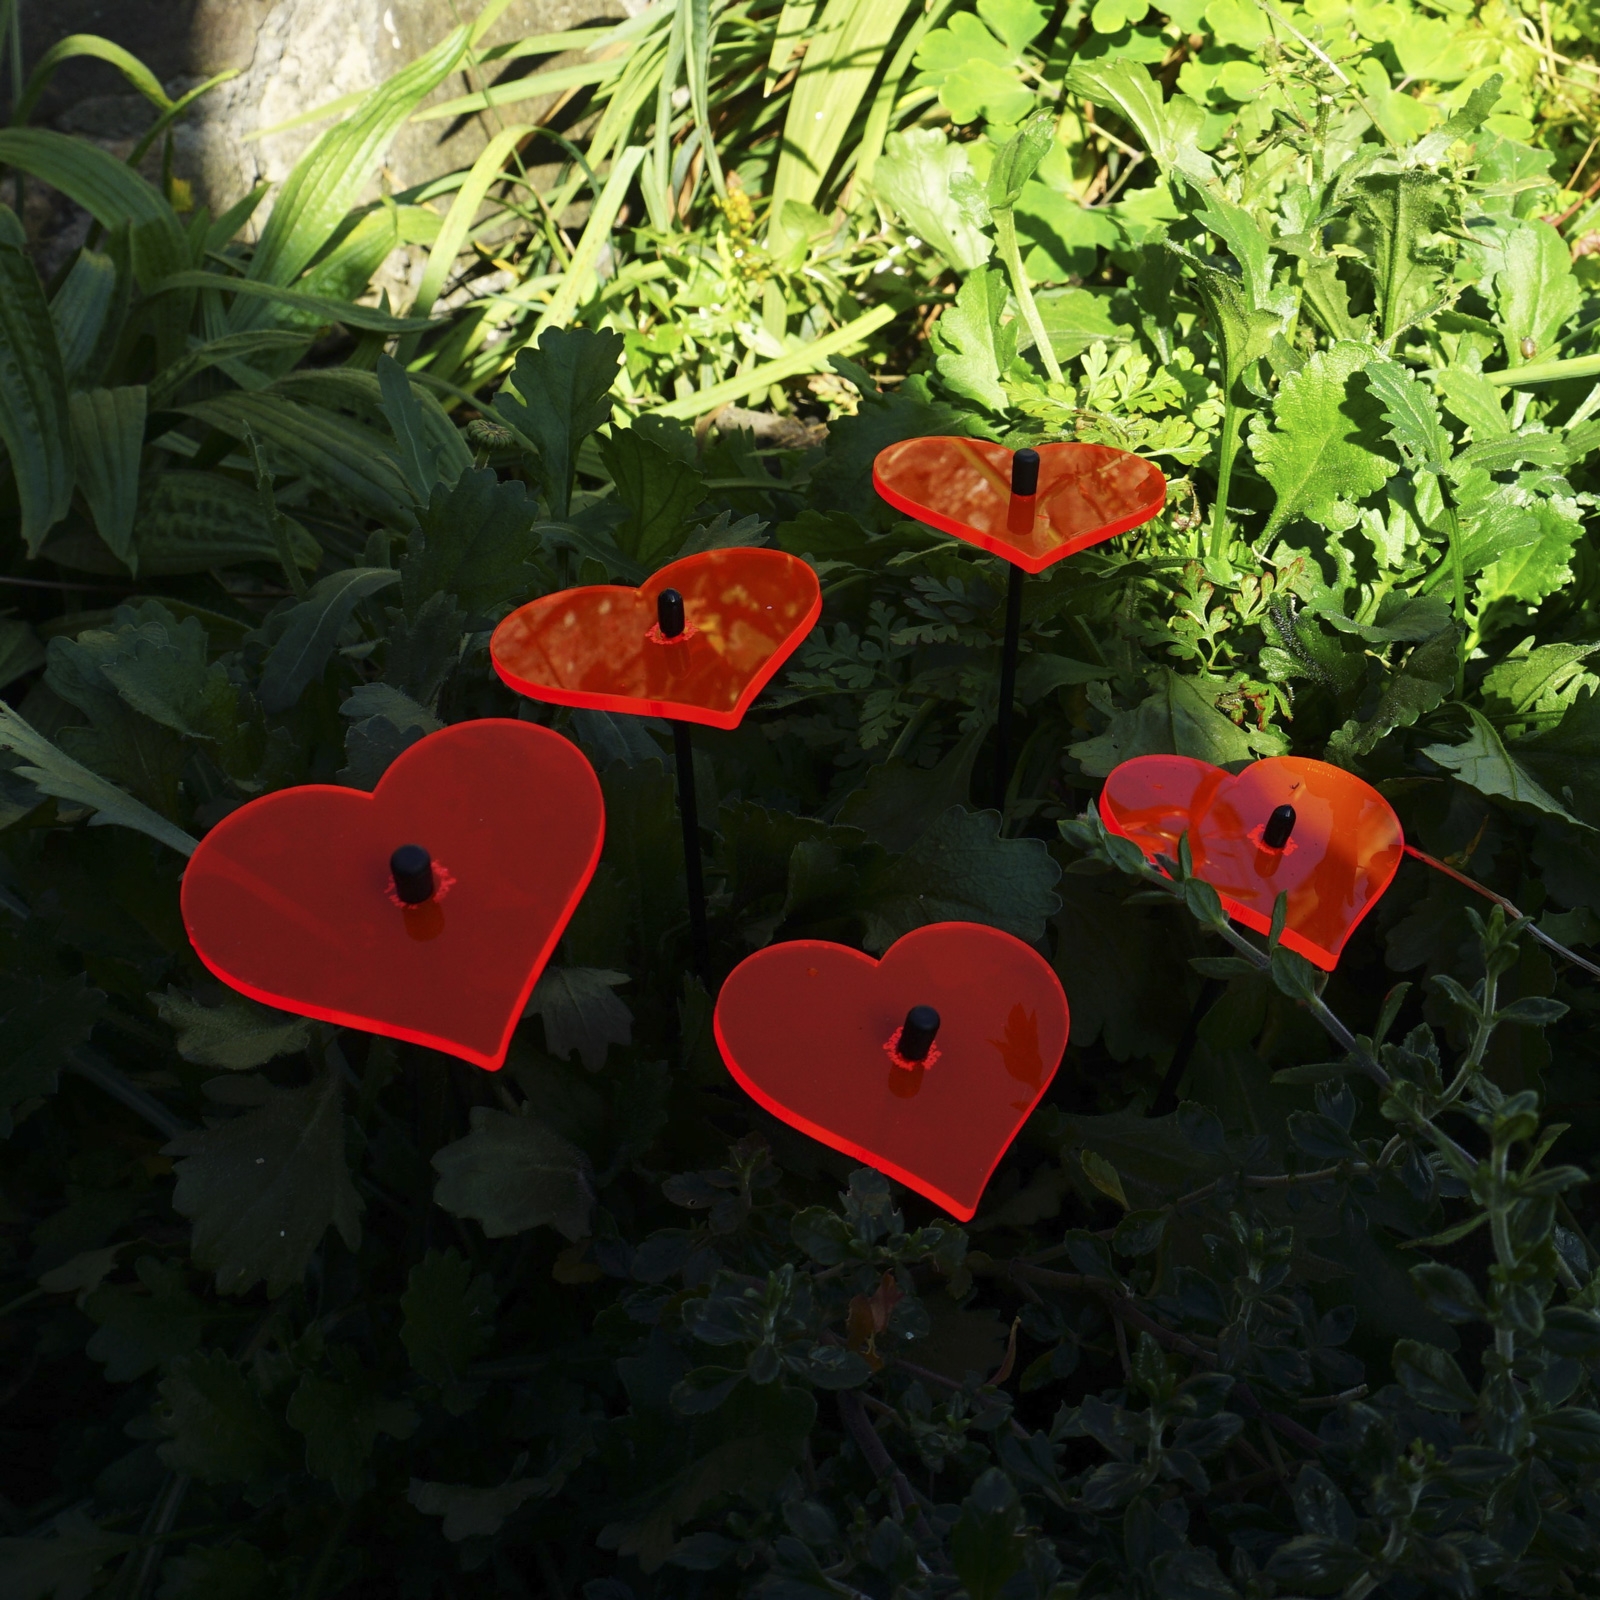 25cm Hearts Garden Stakes 5 Pack